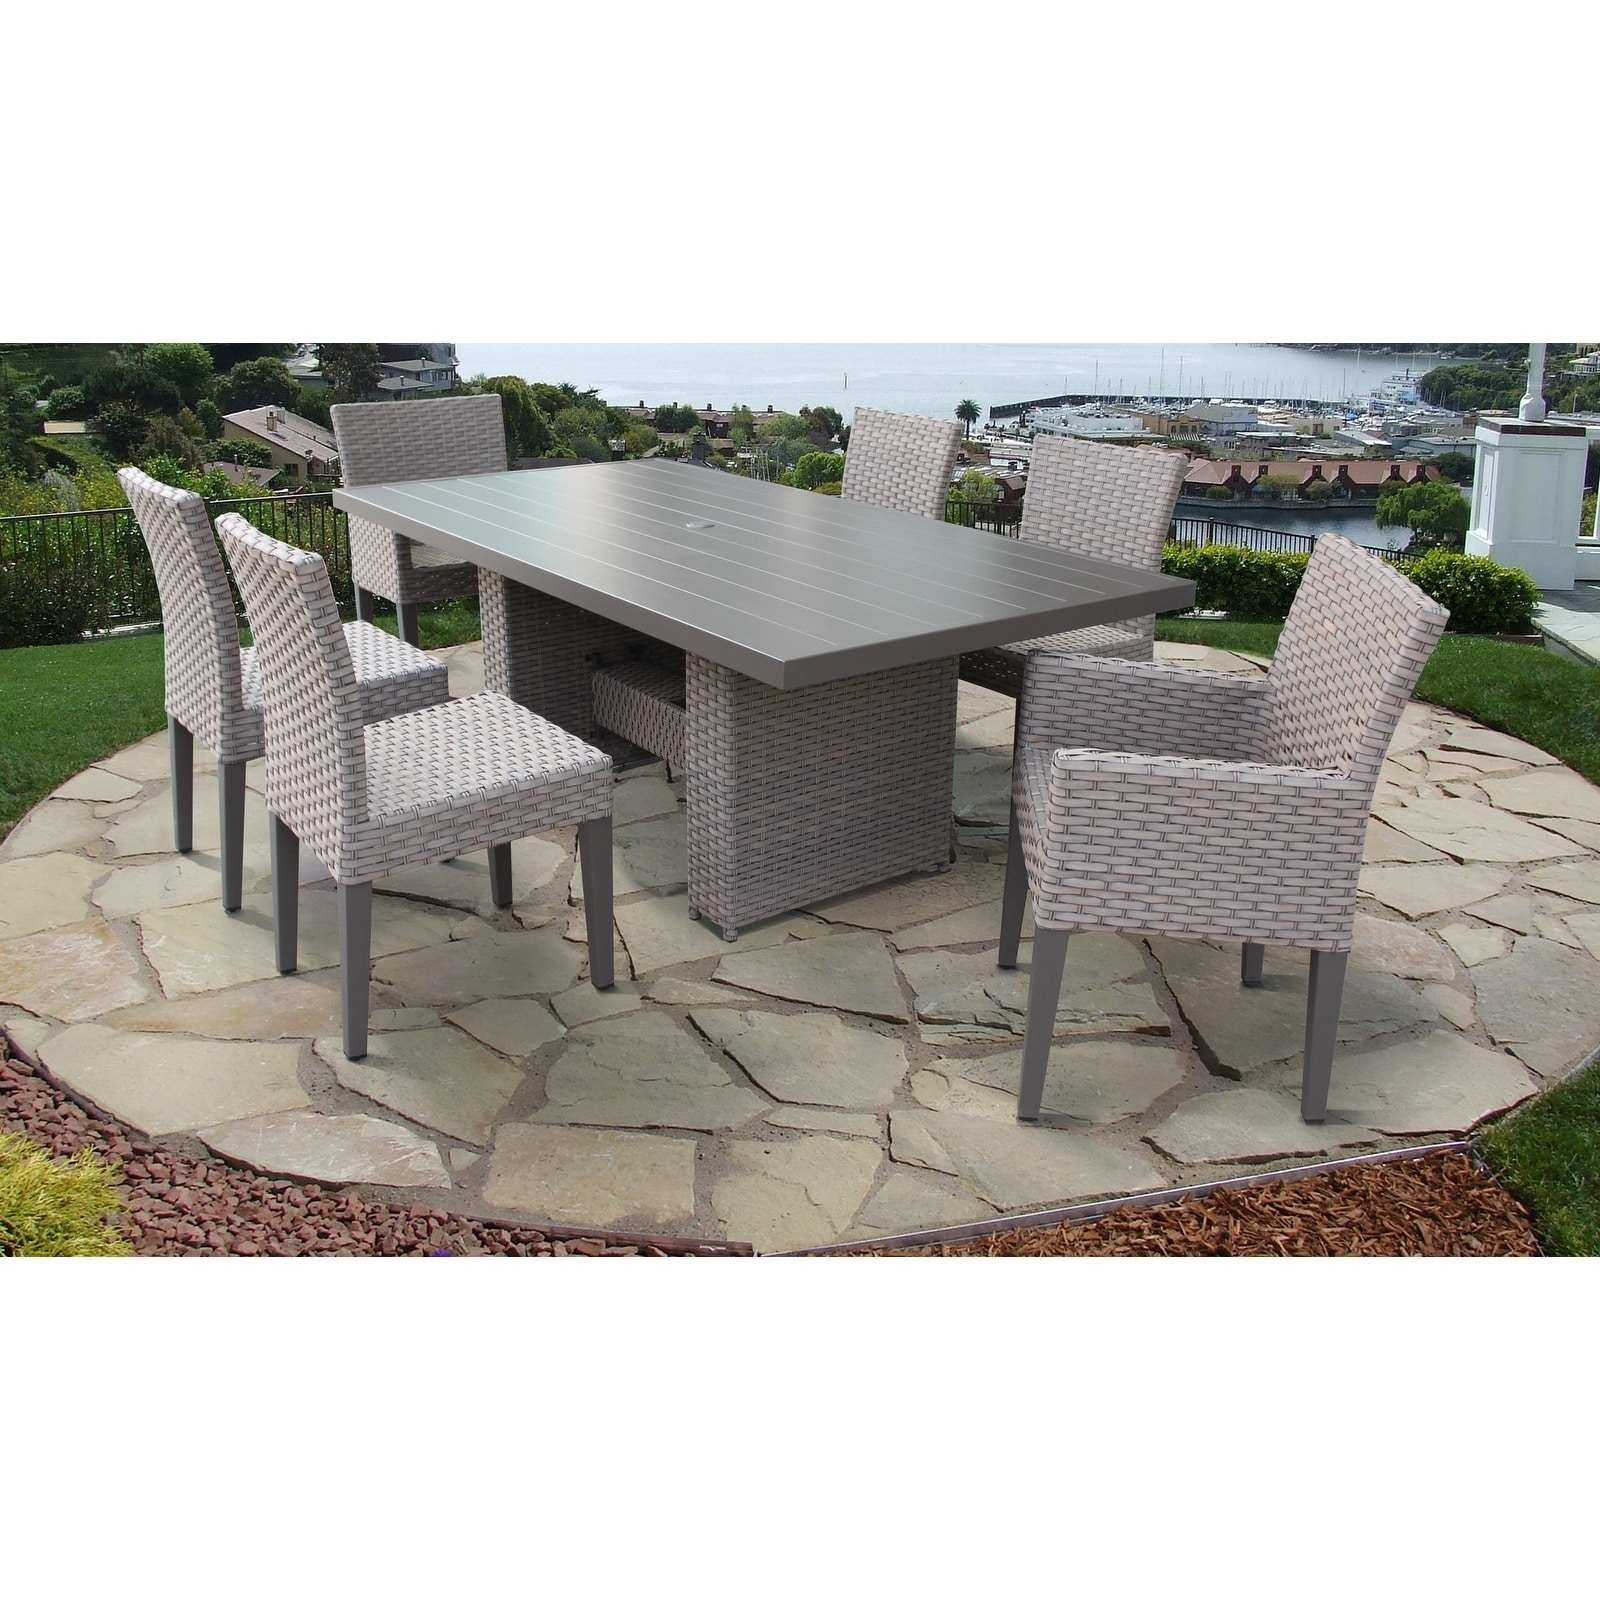 Monterey Rectangular Outdoor Patio Dining Table With 4 Armless Chairs And 2 Chairs W/ Arms